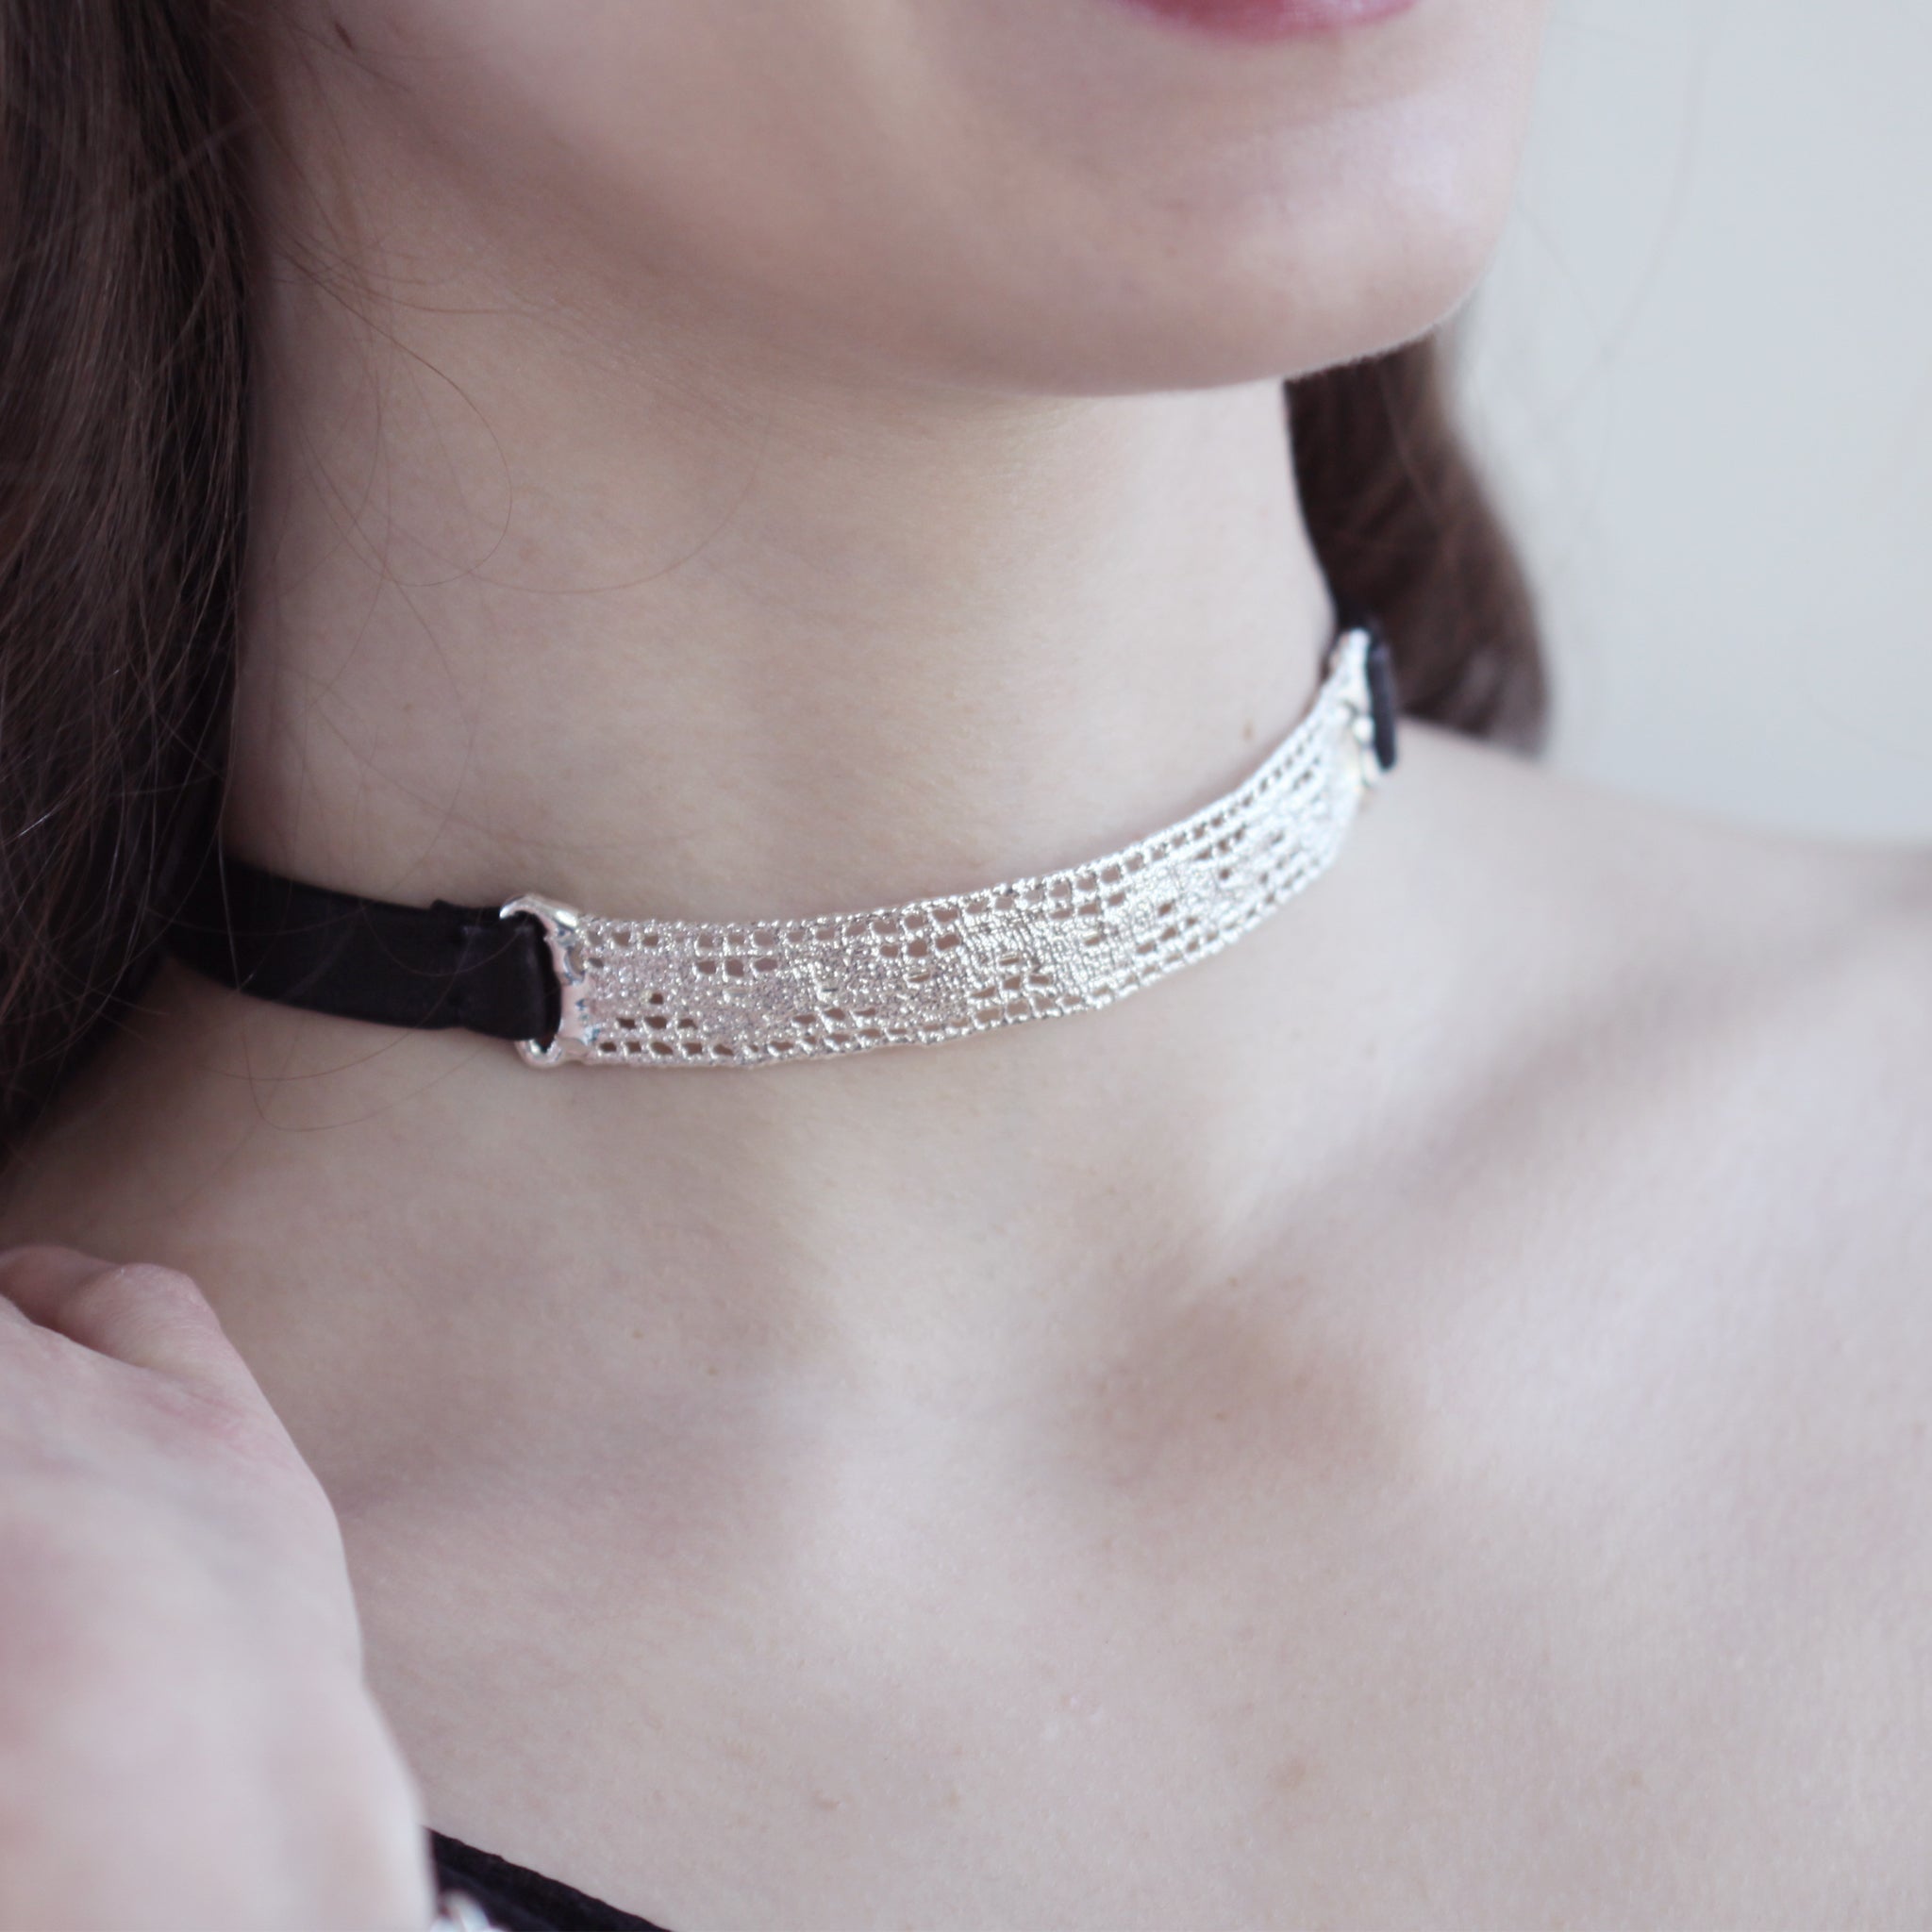 Leontine lace choker necklace in 24k gold or sterling silver - Monika  Knutsson